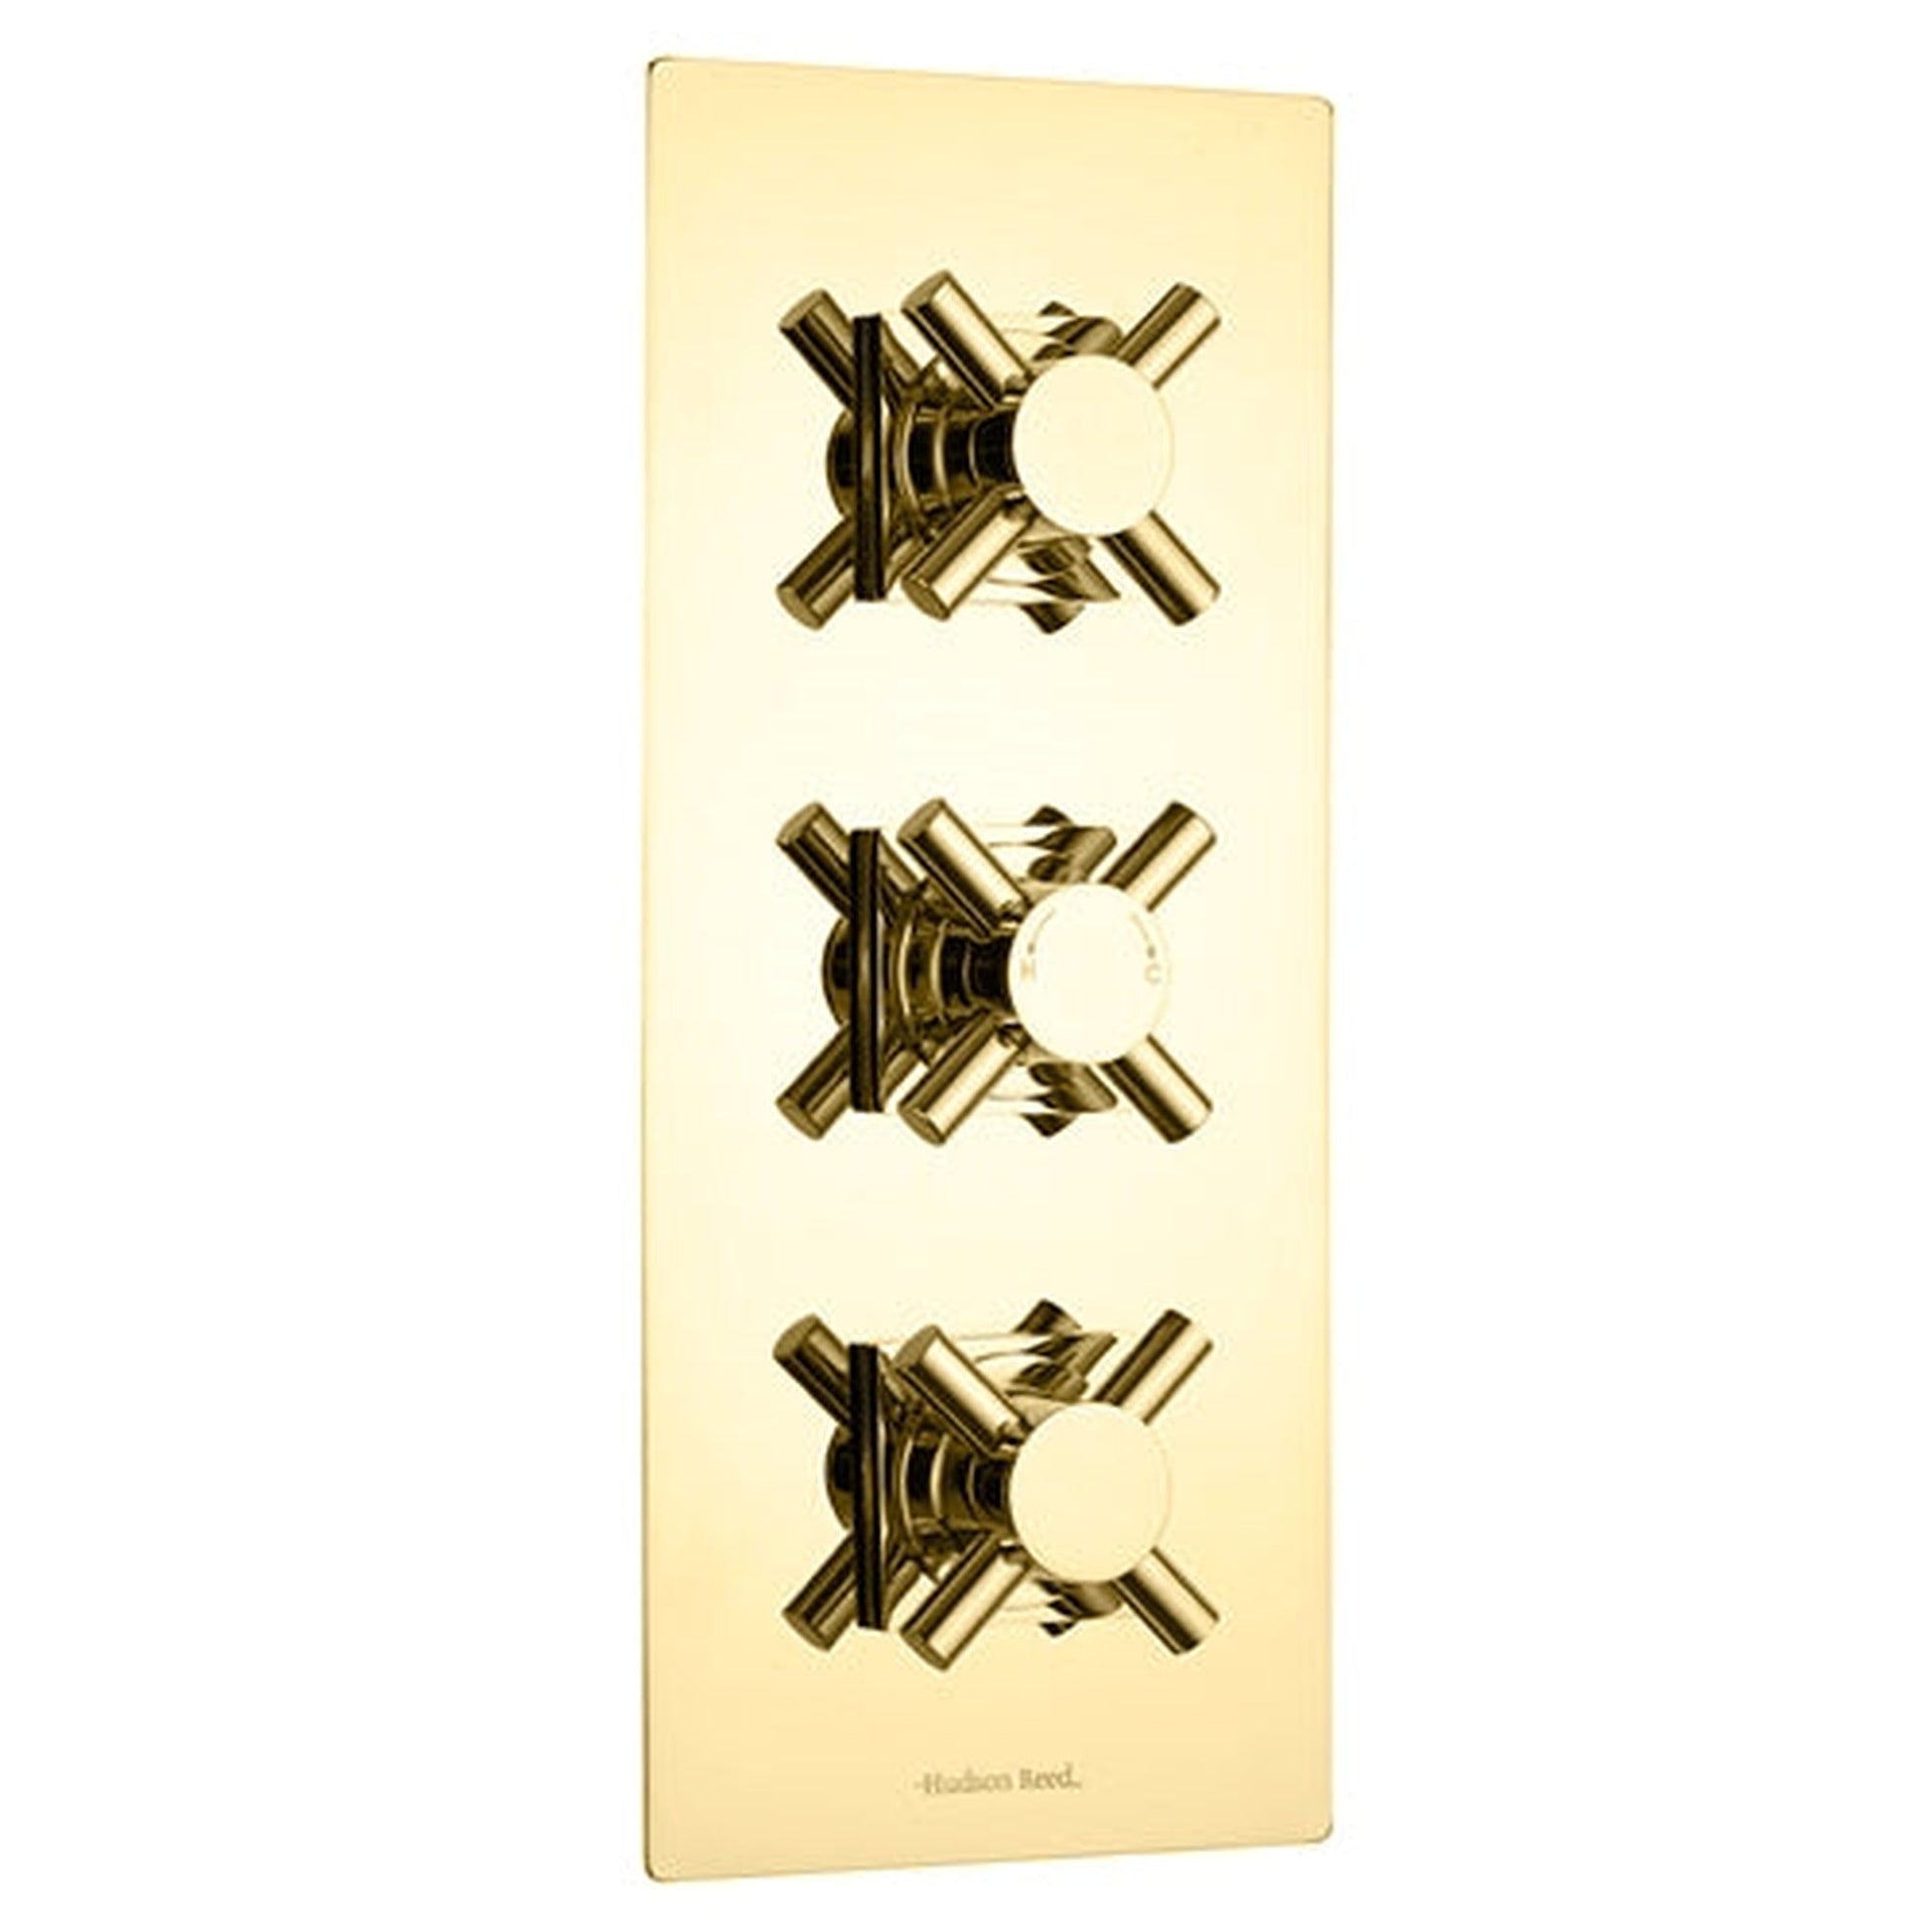 Fontana Reno 10" Gold Square Ceiling Mounted Rainfall Shower System With 6-Body Massage Jets and Hand Shower